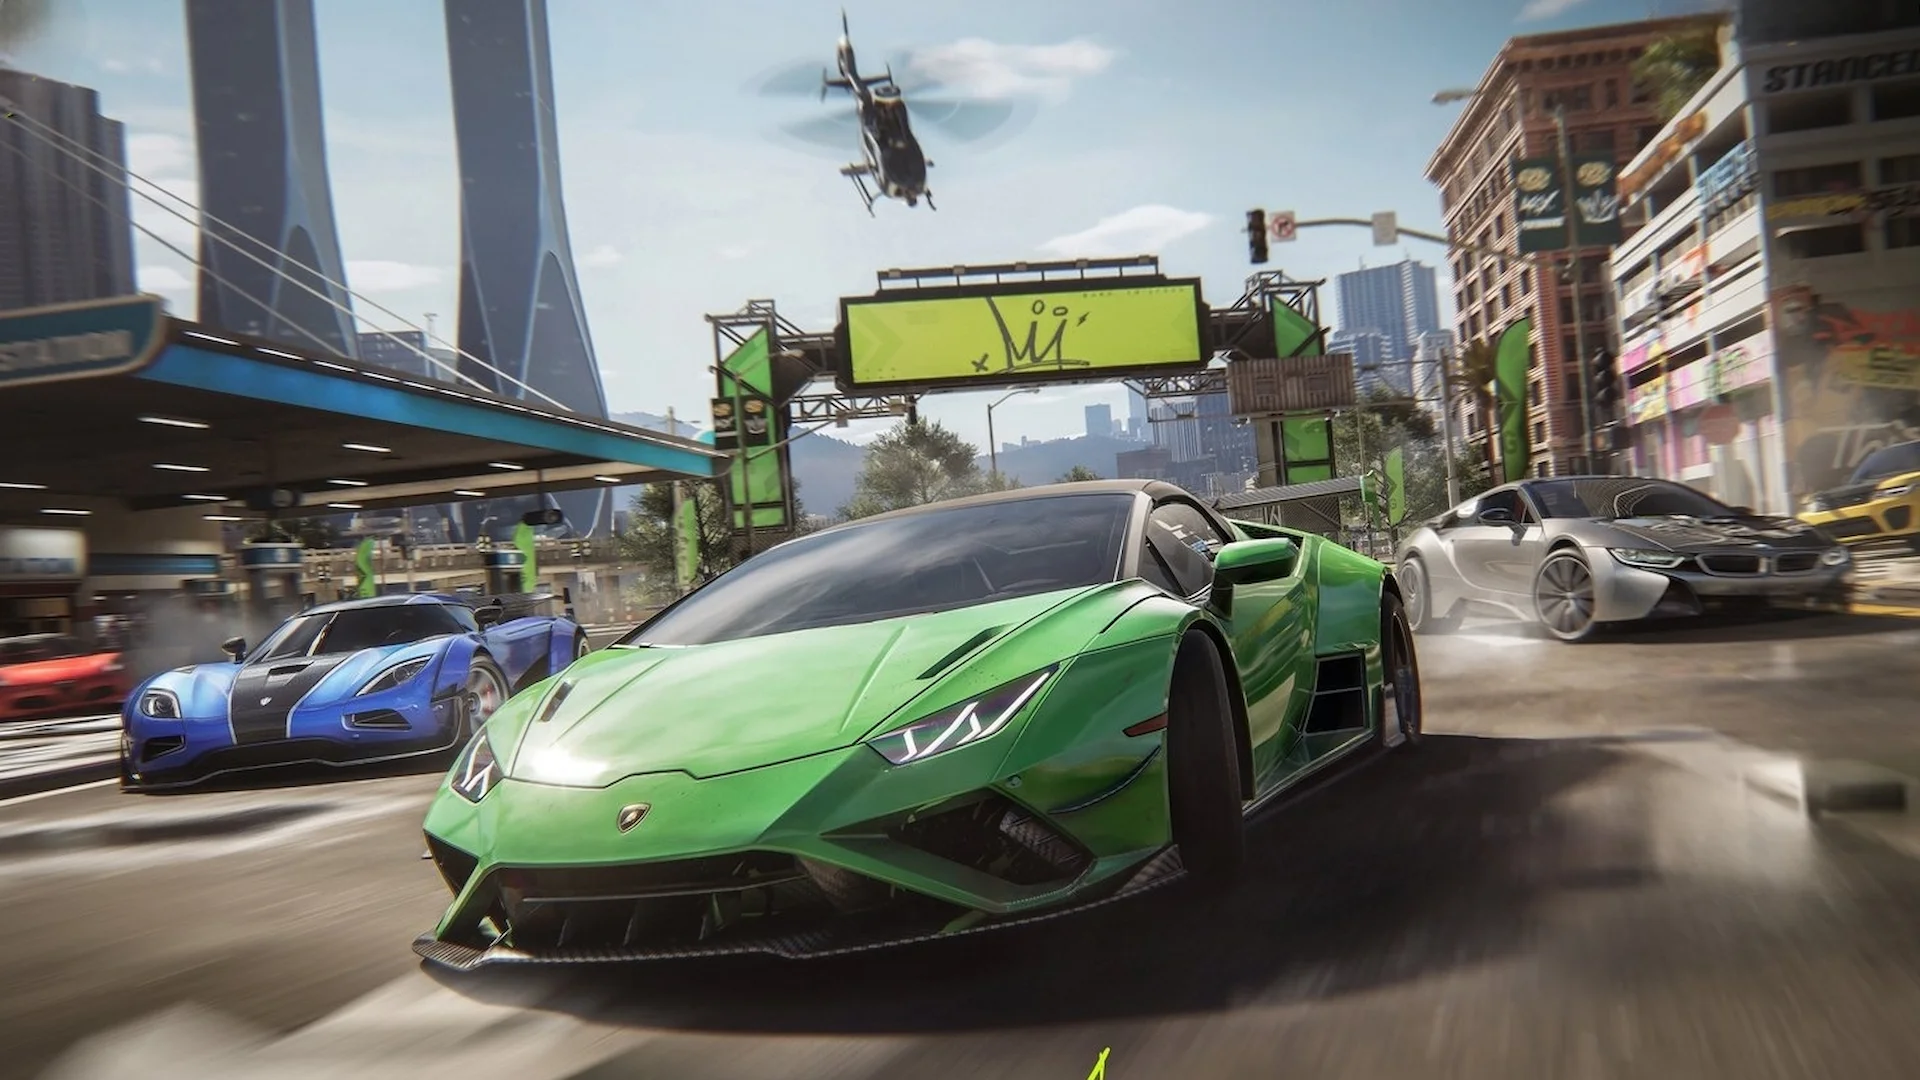 Need for Speed Assemble is Now on the App Store, Revealing Expected Release Date